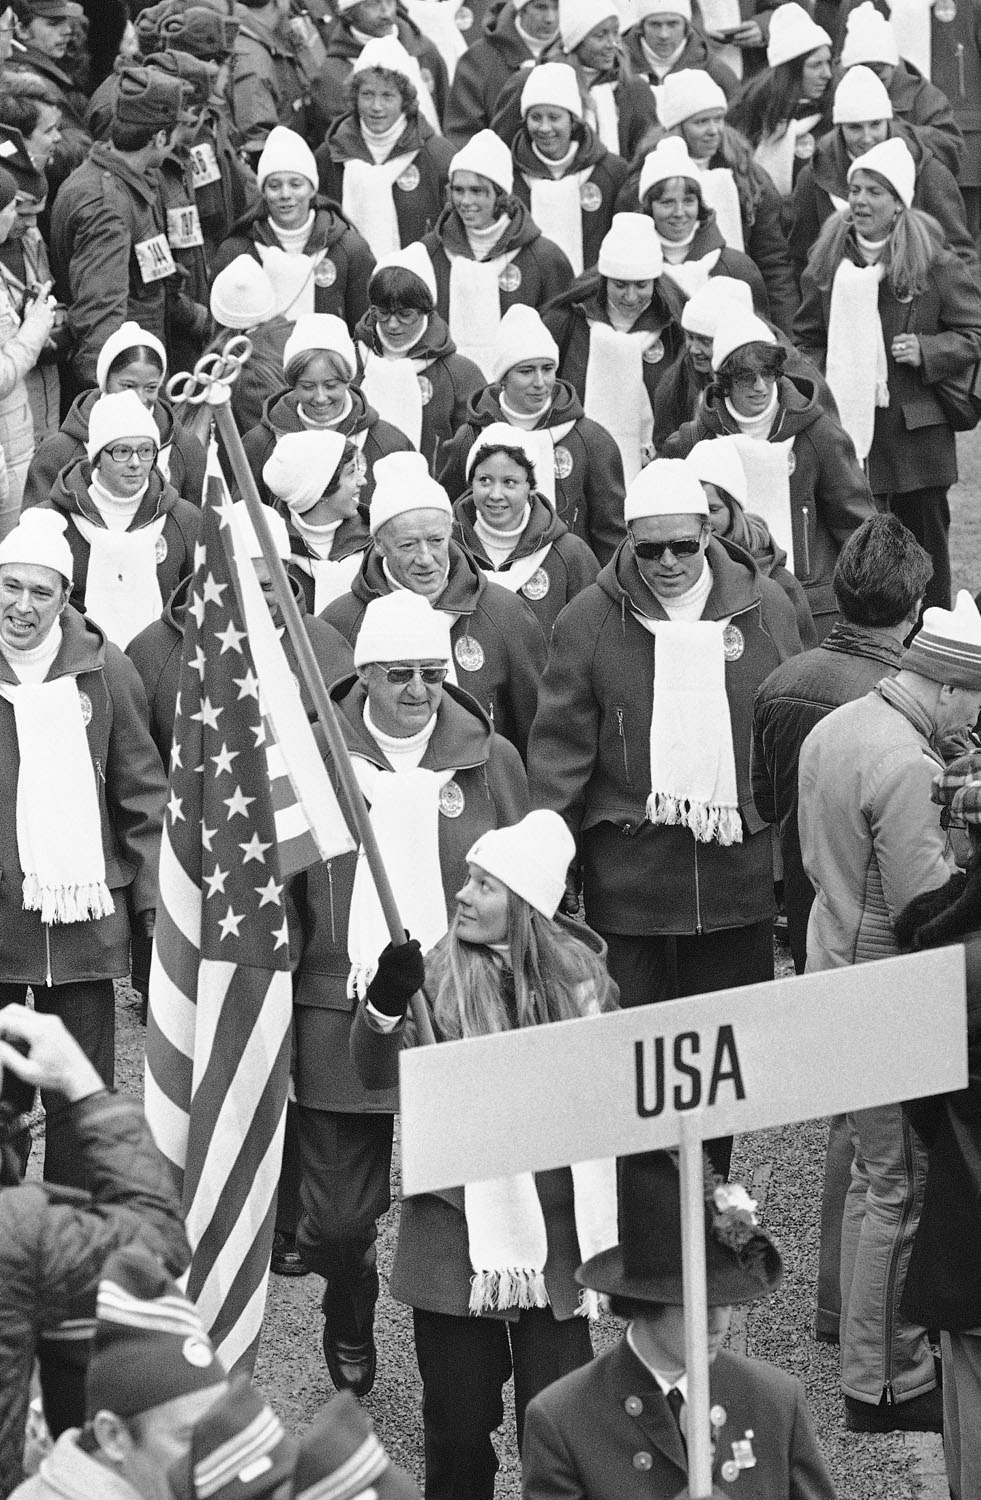 Alpine skier Cindy Nelson bears the flag for the United States team during the opening ceremony of the 12th Winter Olympic Games on Feb. 4, 1976 in Innsbruck, Austria.